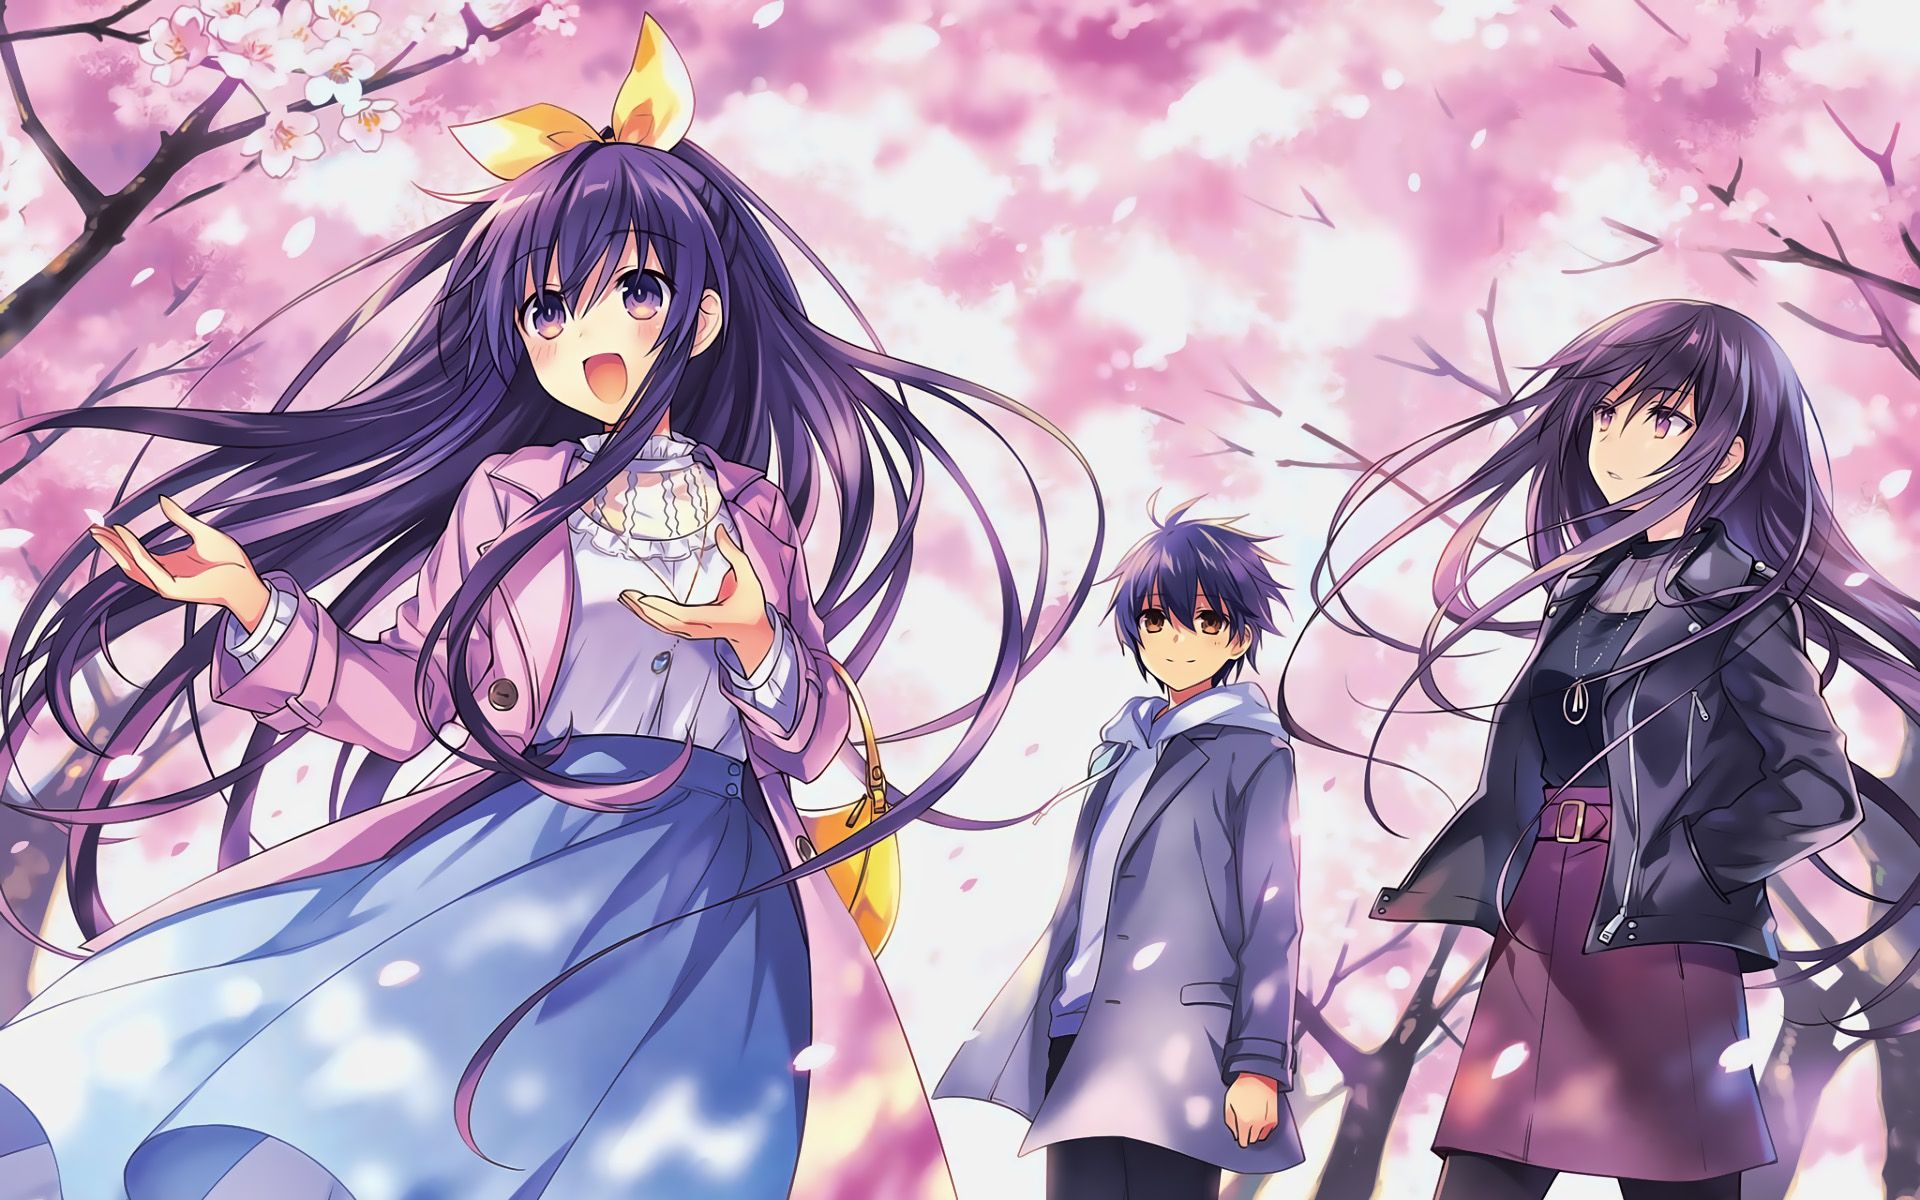 Download wallpaper Tohka Yatogami, Shido Itsuka, artwork, spring, manga, Date A Live for desktop with resolution 1920x1200. High Quality HD picture wallpaper